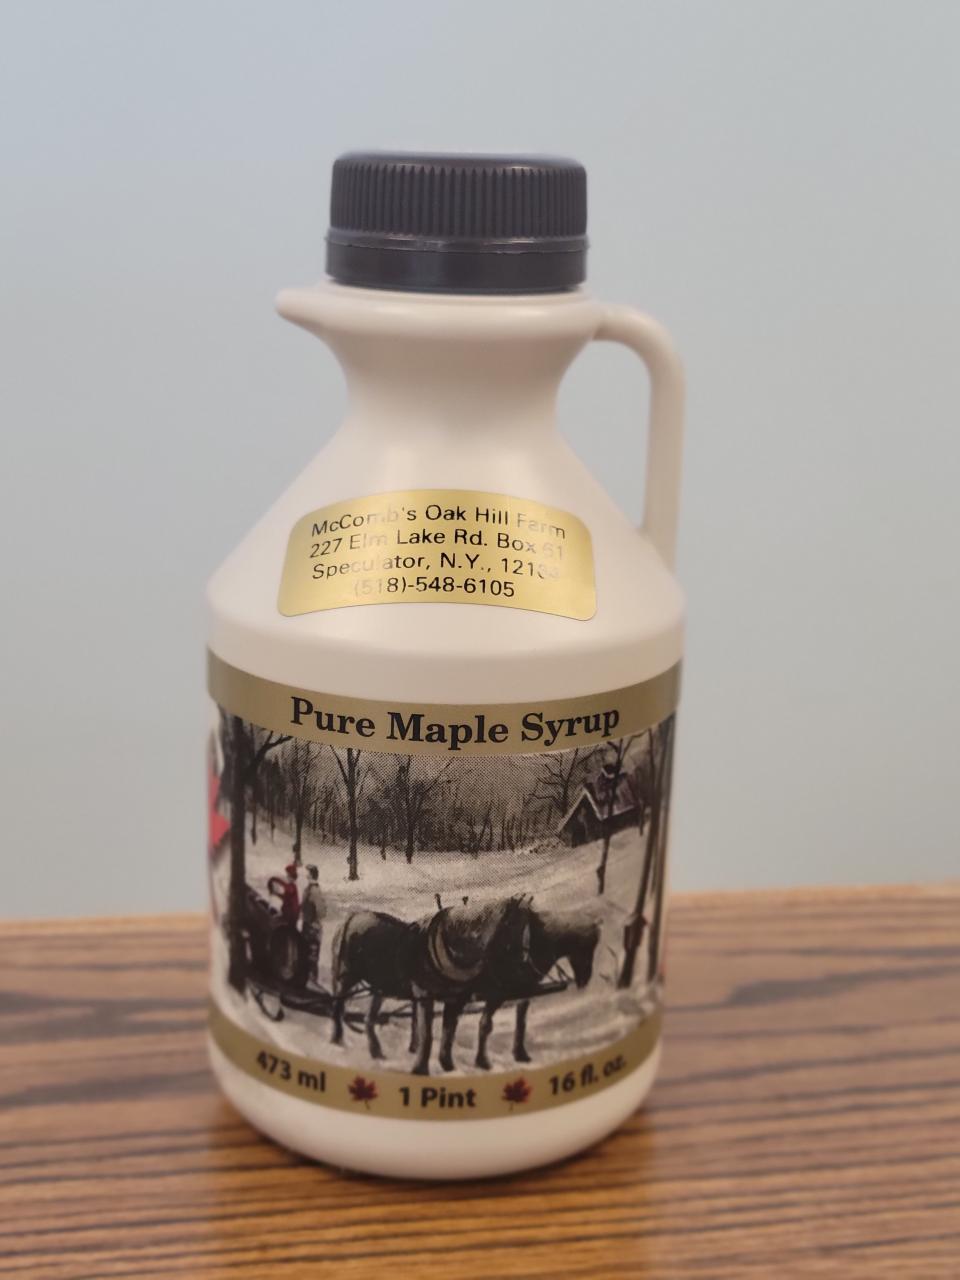 A plastic jug of maple syrup.